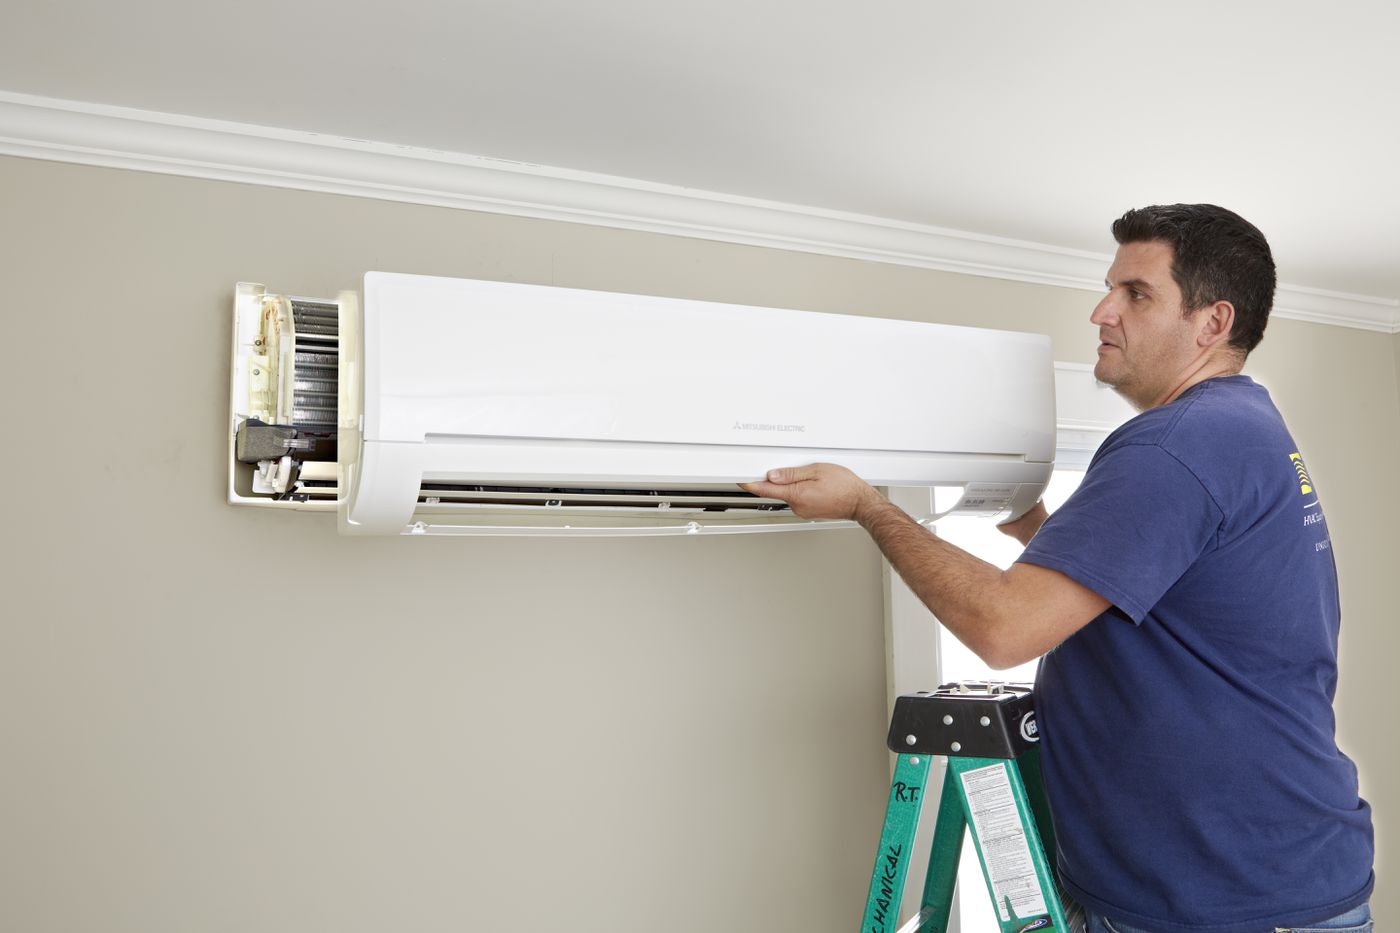 How to Seal the Air Conditioner Hole in the Wall